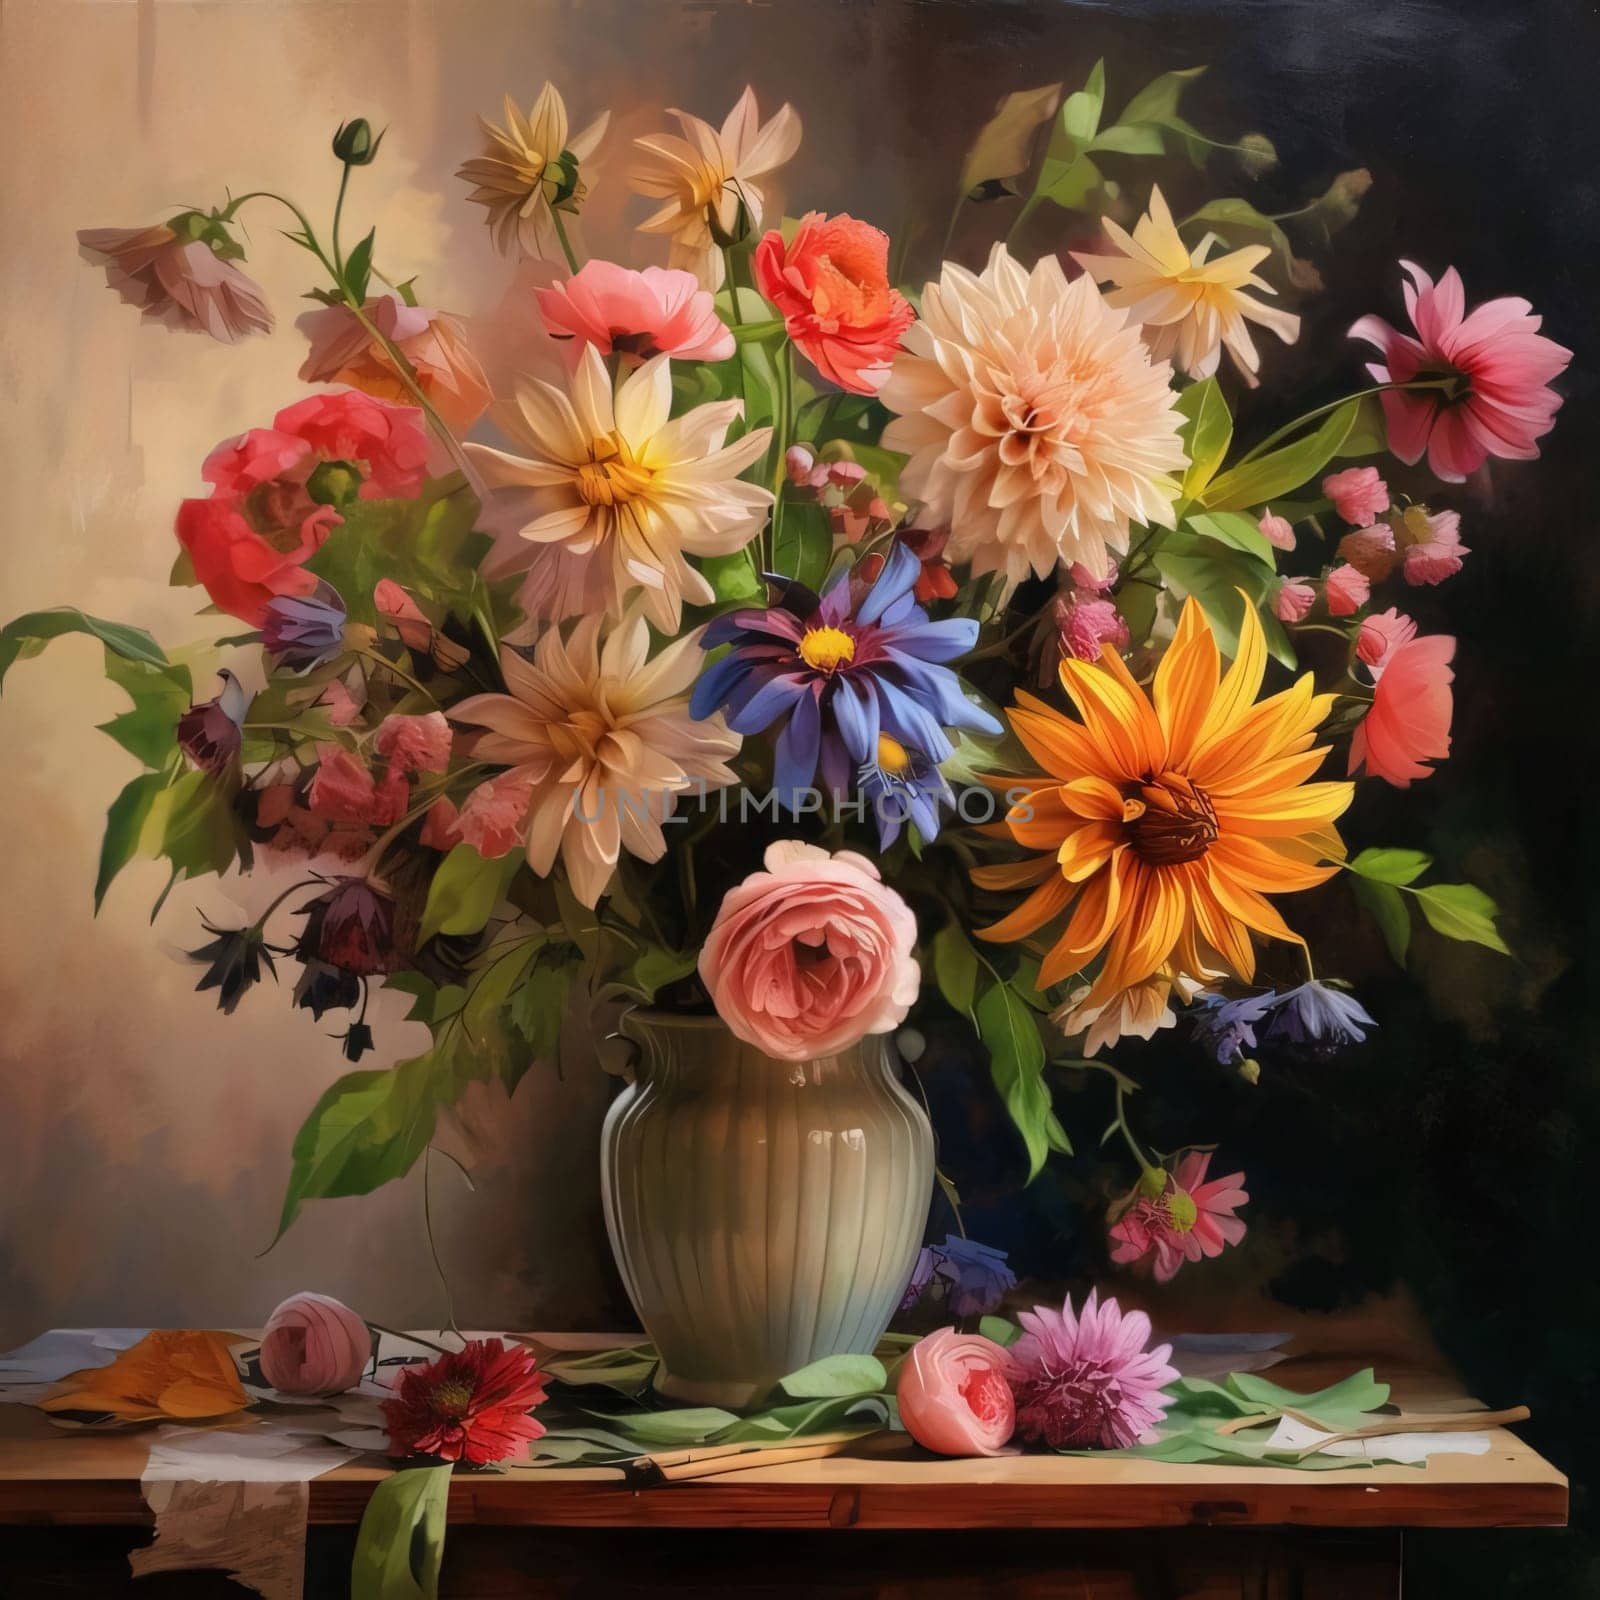 Colorful flowers of different kinds of species in a vase, on a dark background. Flowering flowers, a symbol of spring, new life. A joyful time of nature waking up to life.